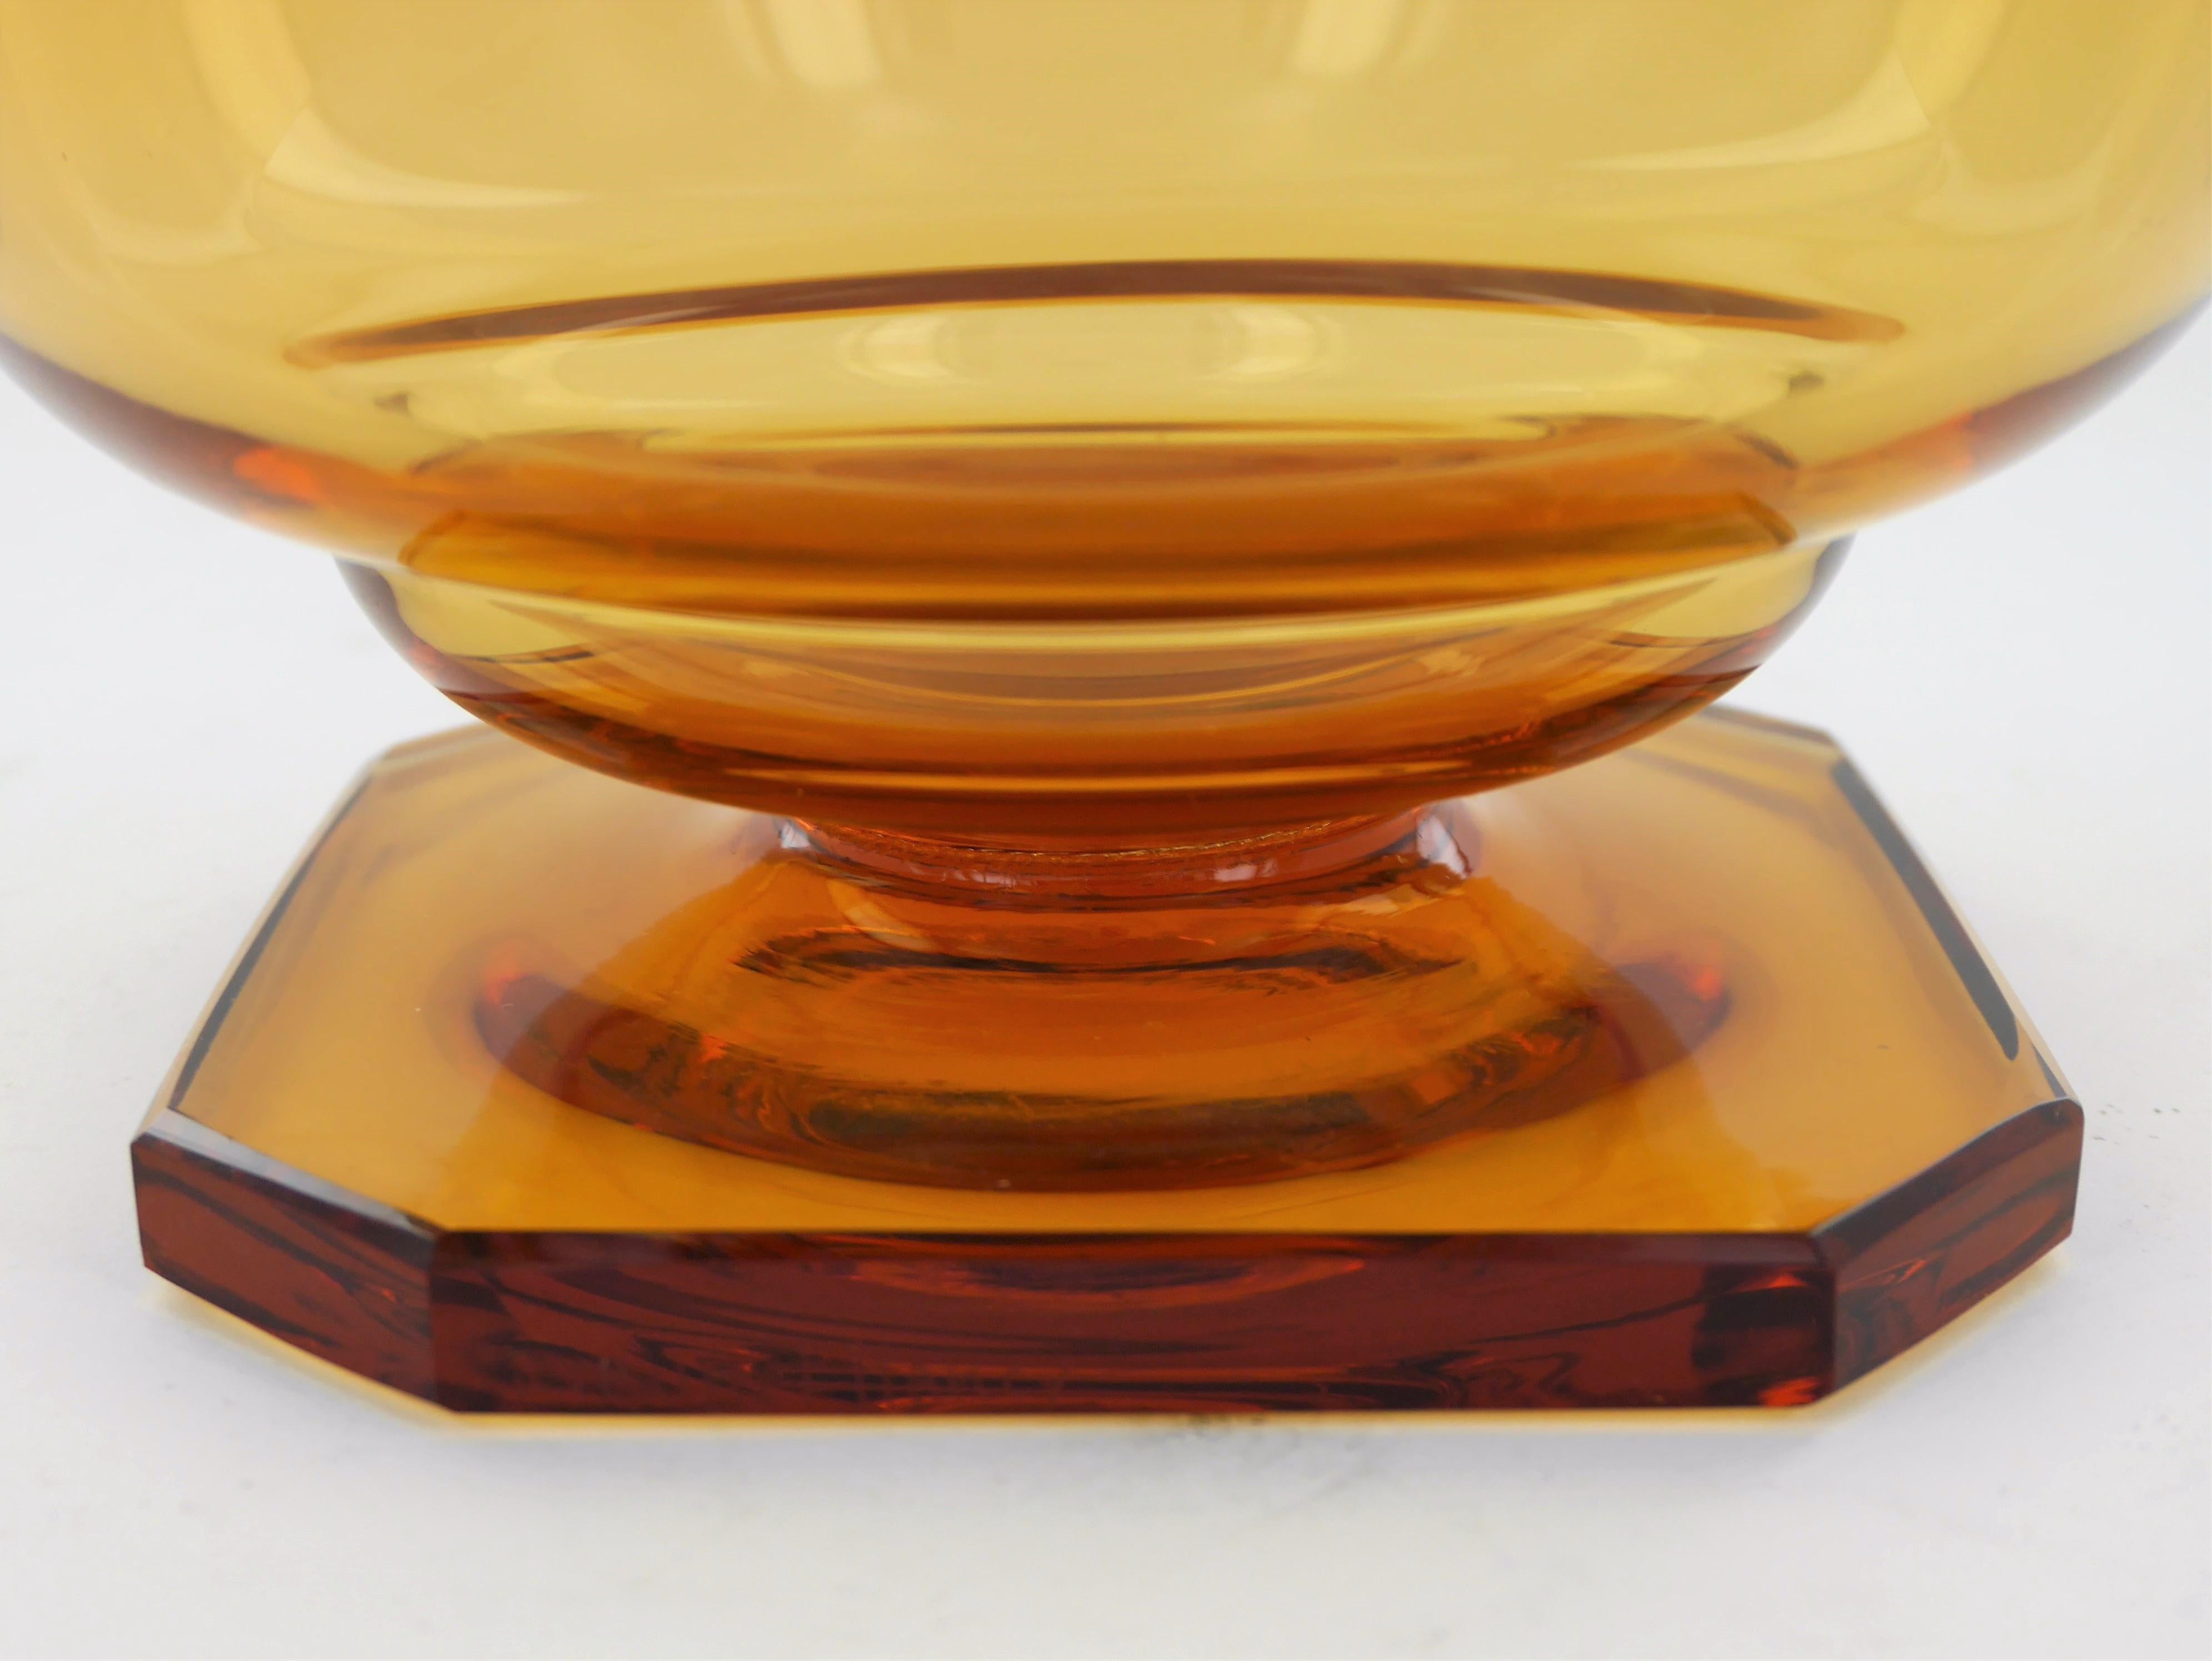 French An Art Deco Large Amber Glass Vase or Serving Bowl by Daum, 1930s